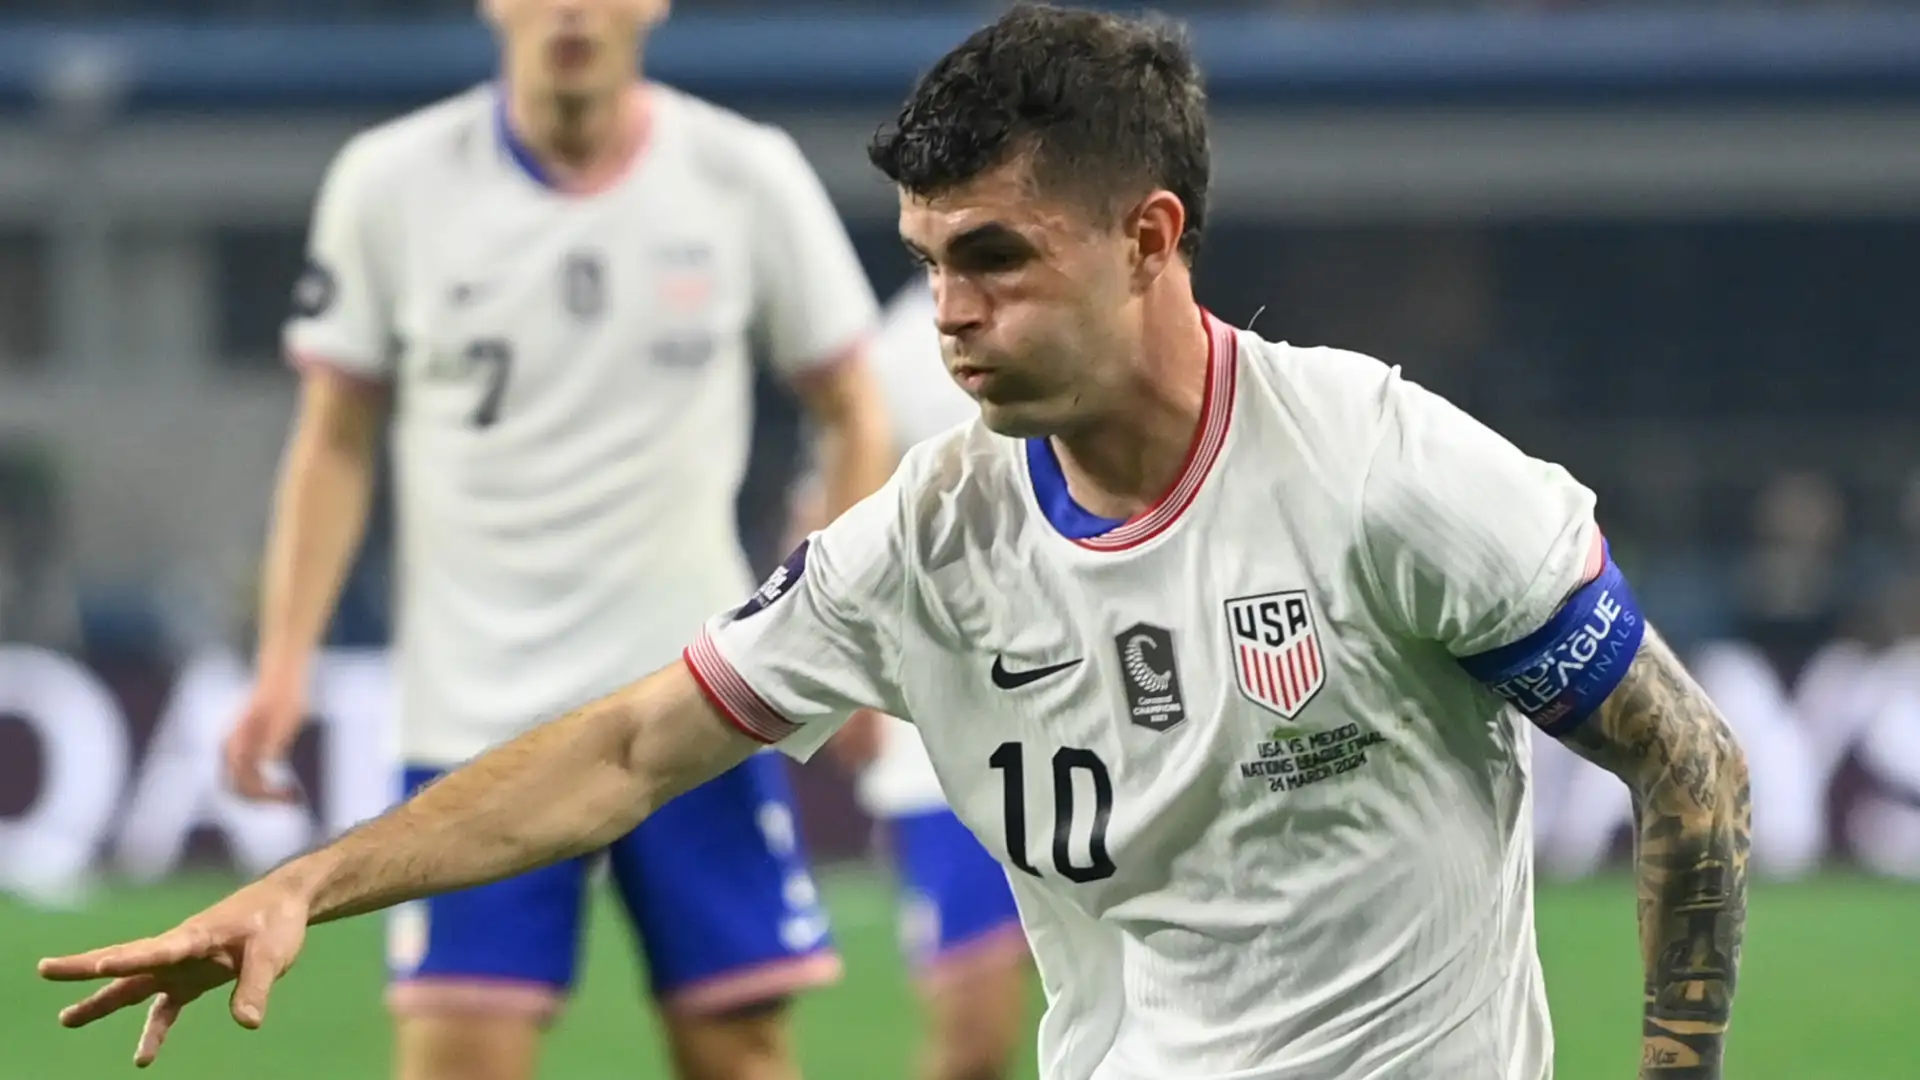 Inspired by Ryan Reynolds & David Beckham? USMNT & AC Milan star Christian Pulisic gets his own documentary – with fans promised ‘unprecedented access’ to private life